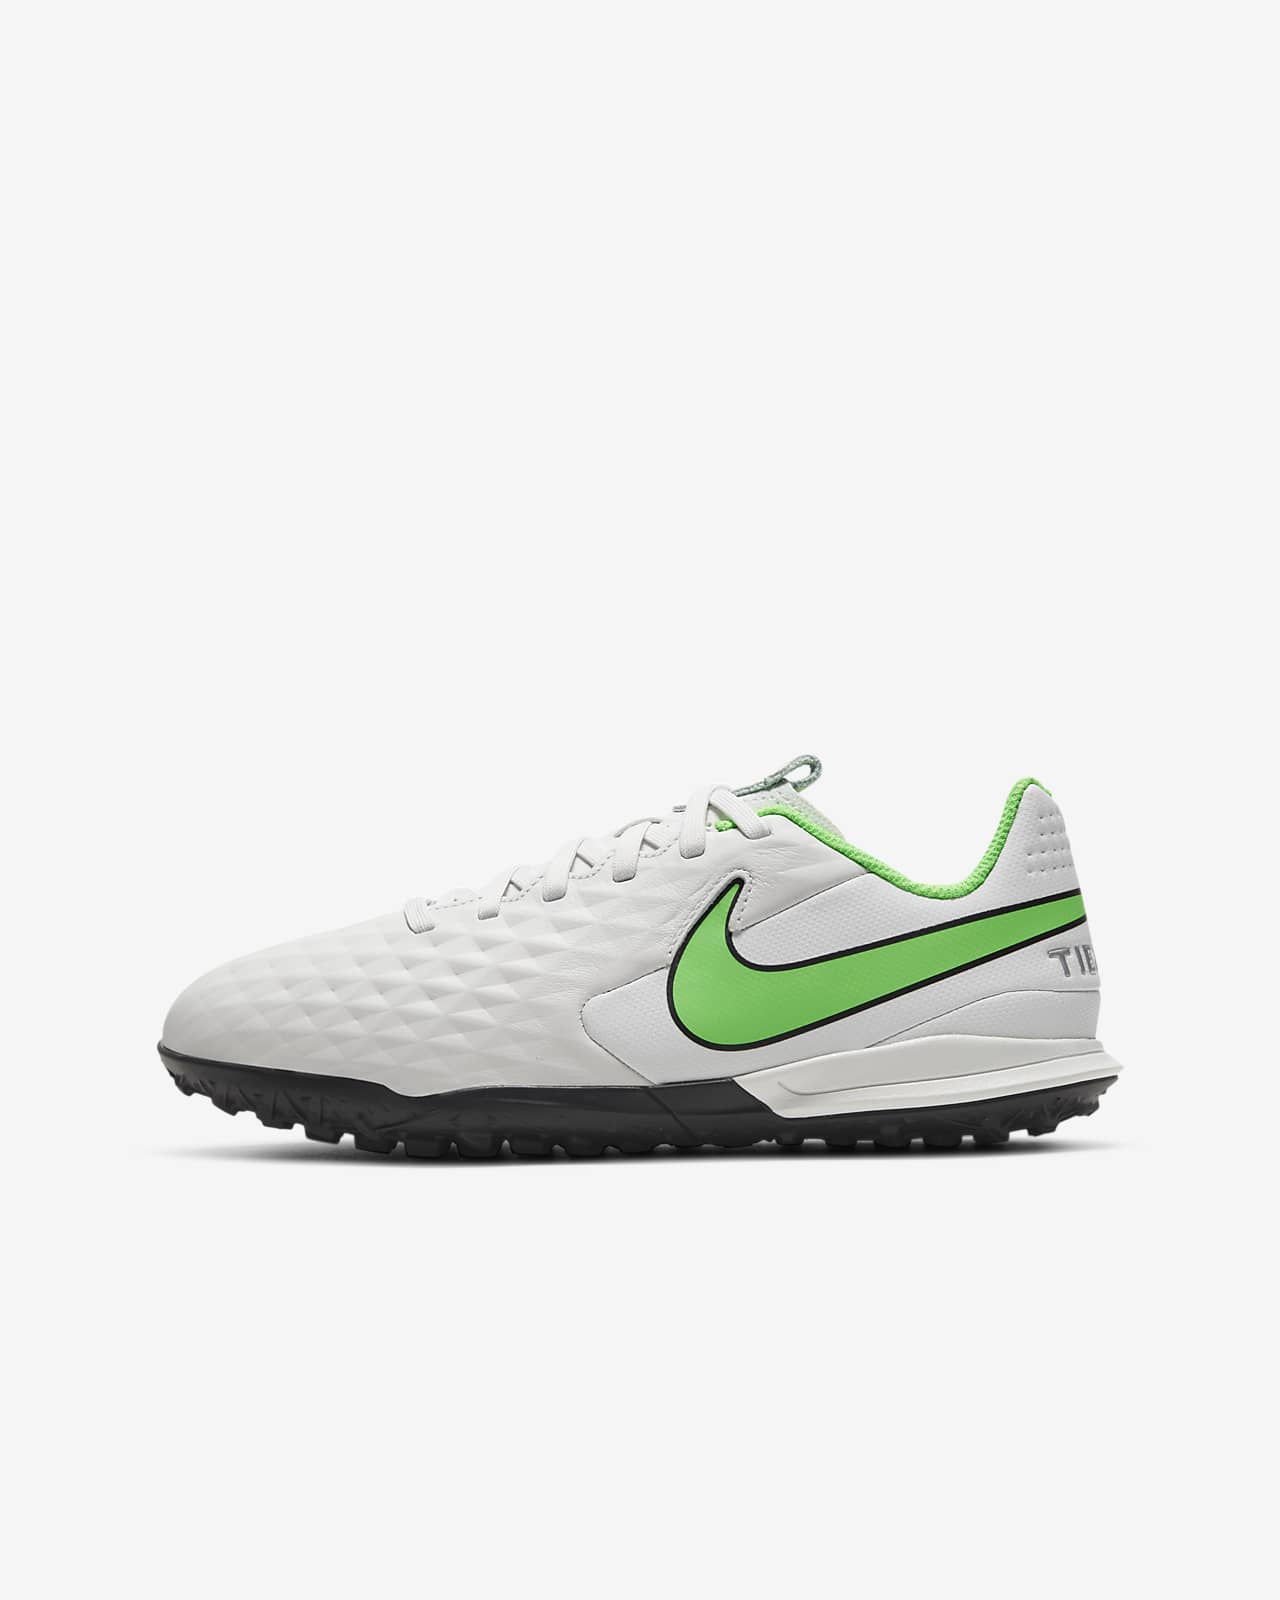 nike indoor turf soccer shoes